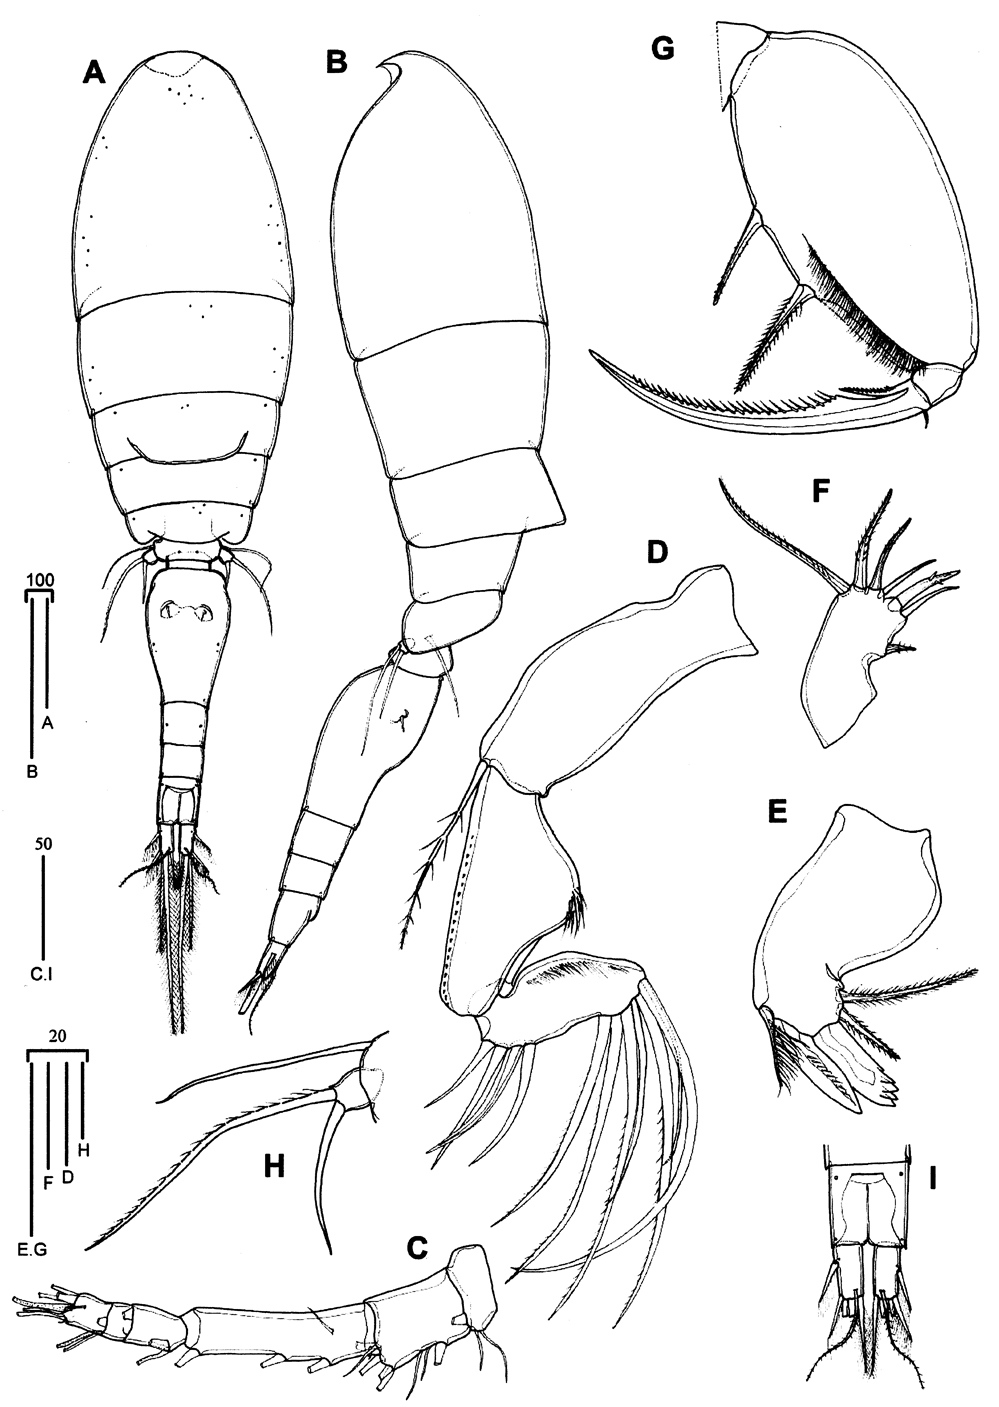 Species Triconia borealis - Plate 7 of morphological figures